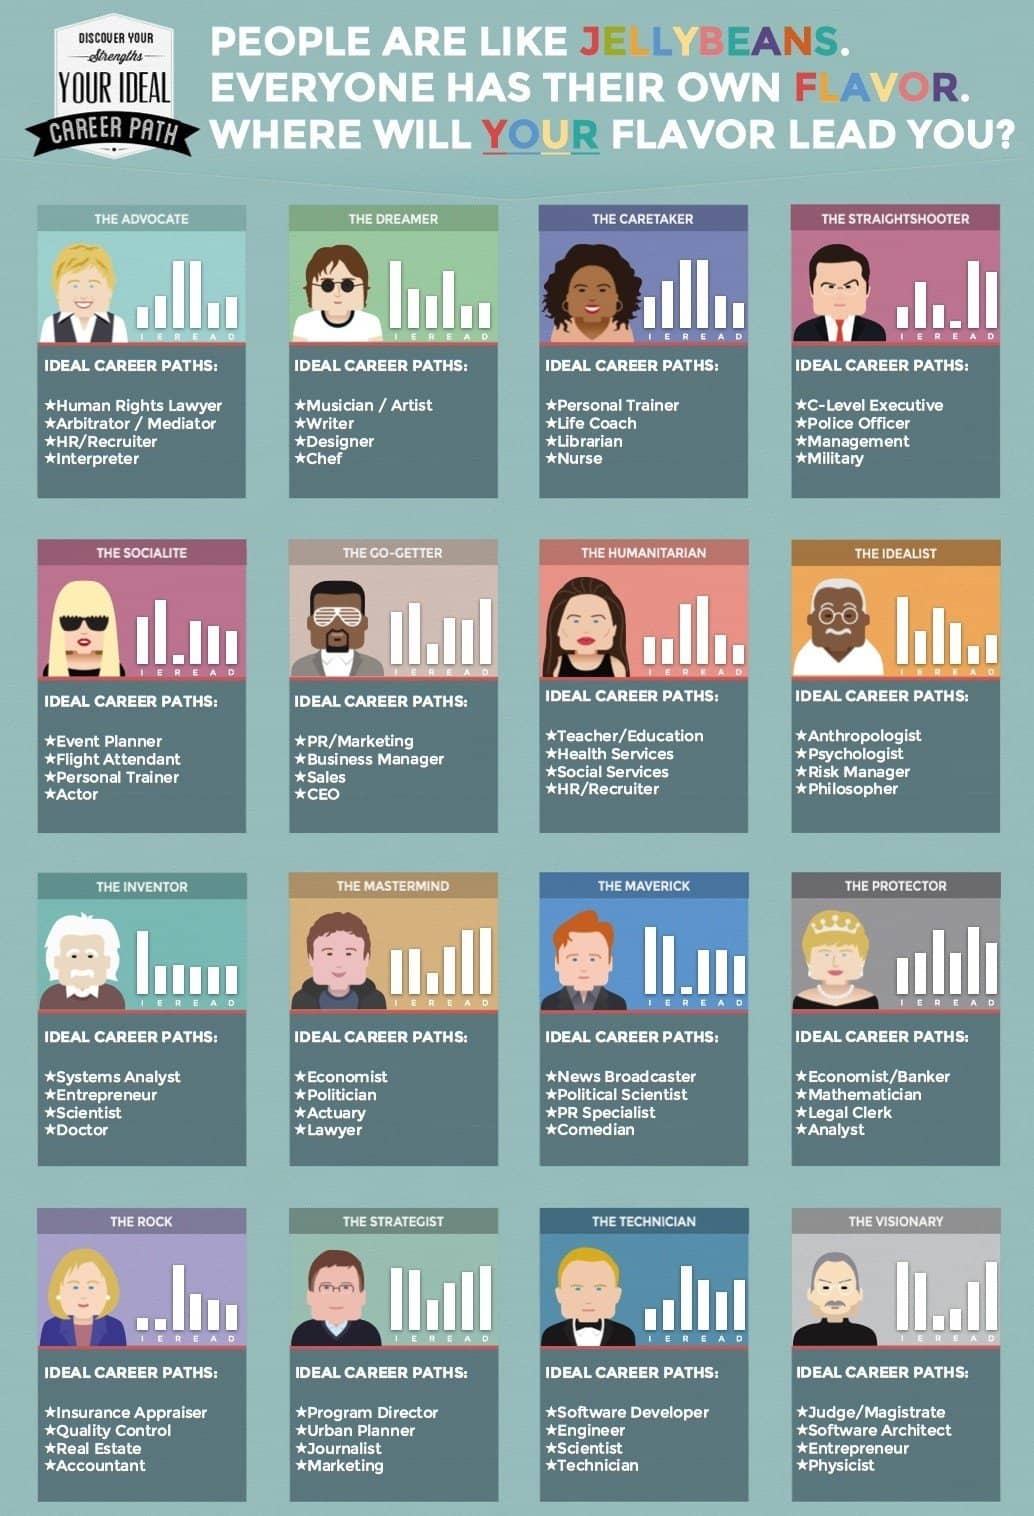 Interactive Infographic: What is Your Ideal Career Path? | Good&Co